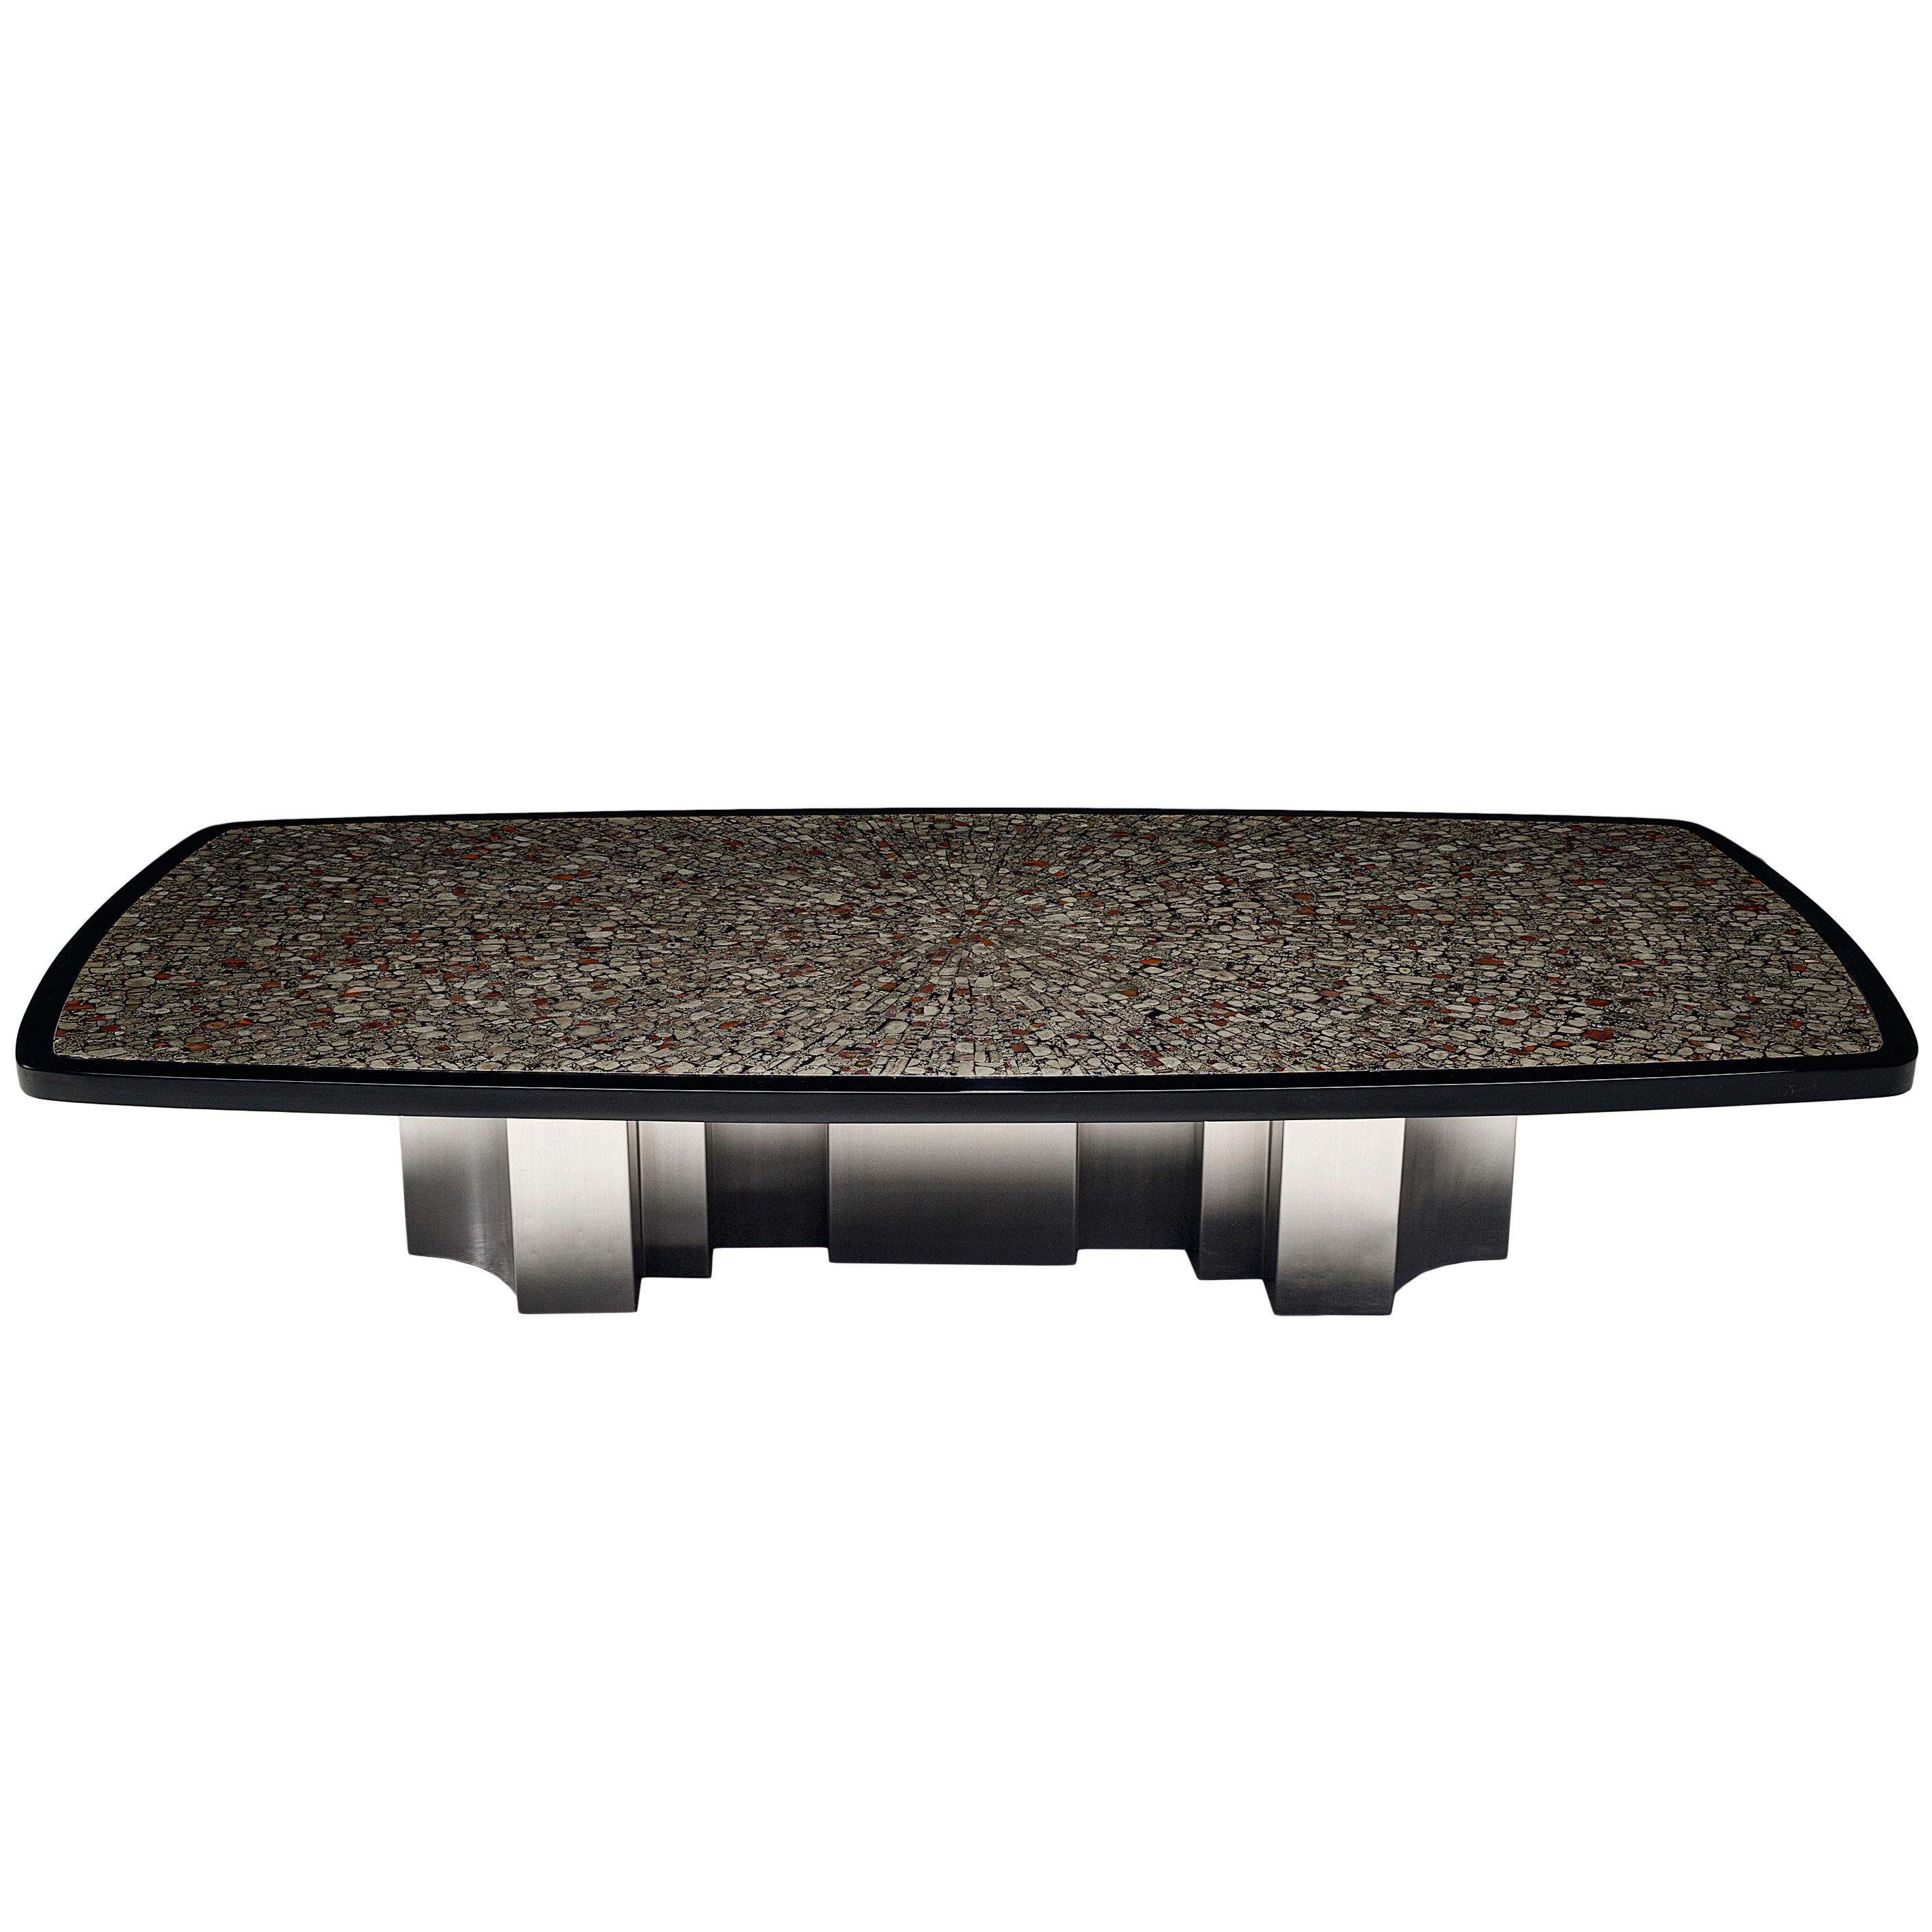 Large Jean Claude Dresse Coffee Table with Inlay of Marcasite